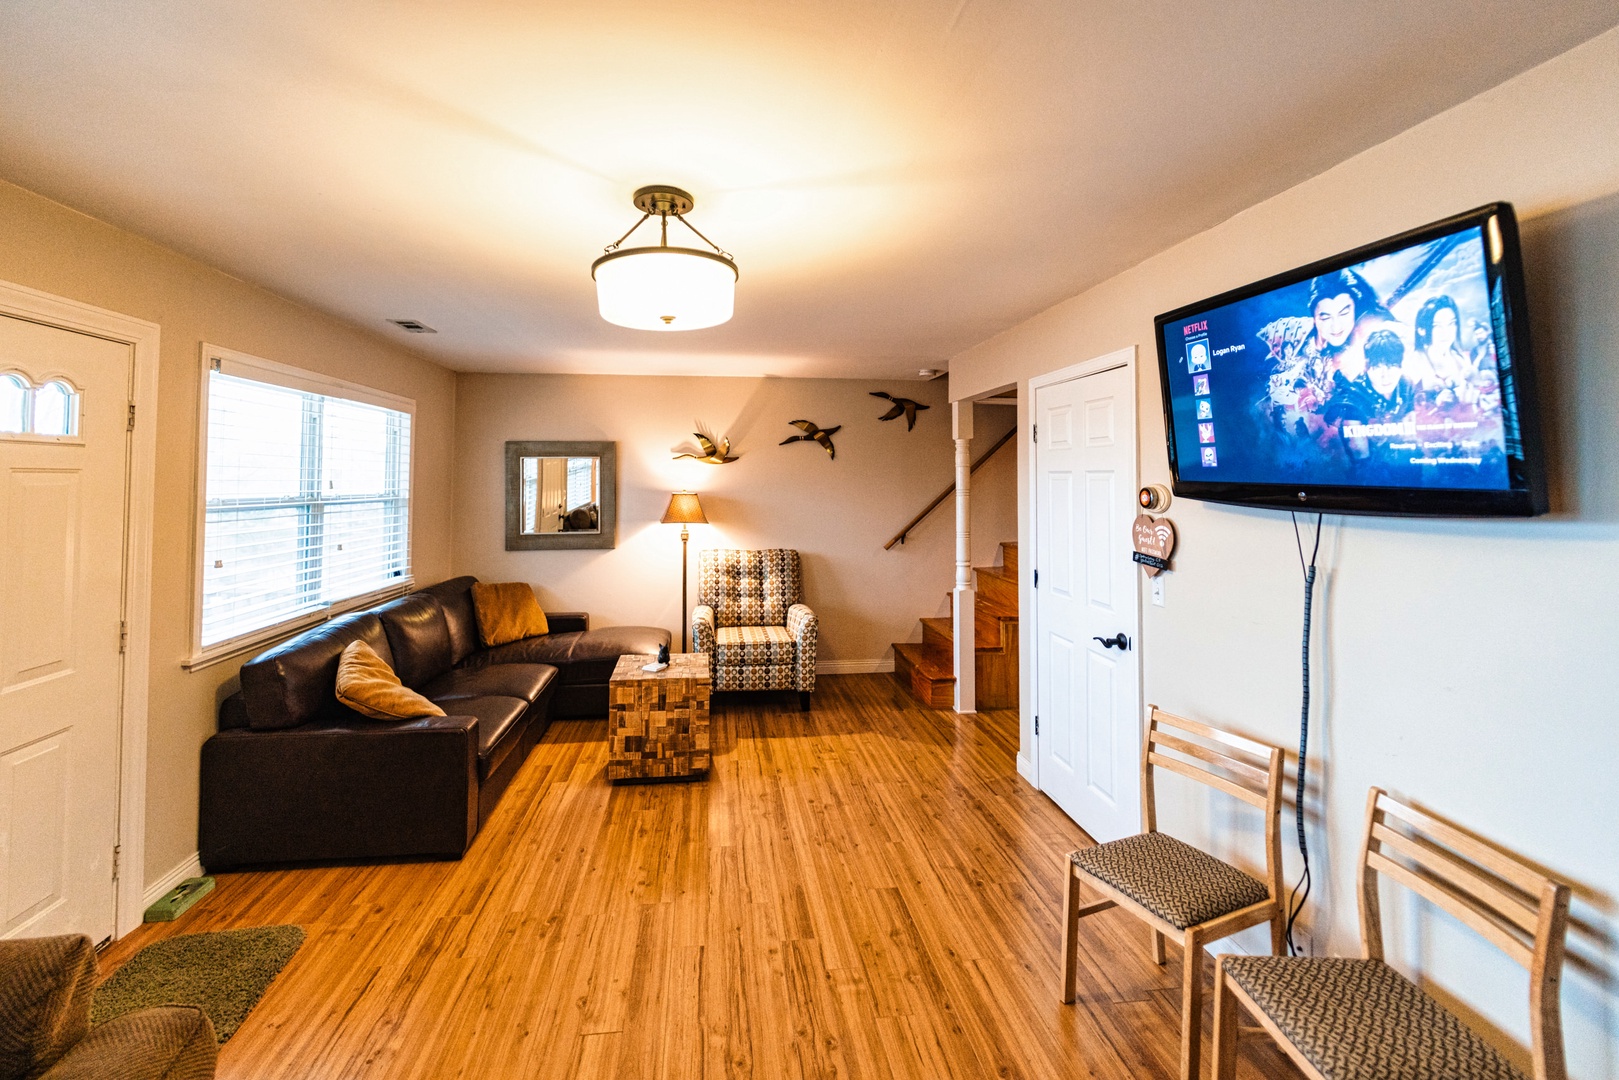 Indulge in your favorite movies and shows within the living space, complete with a sofa sleeper and a futon